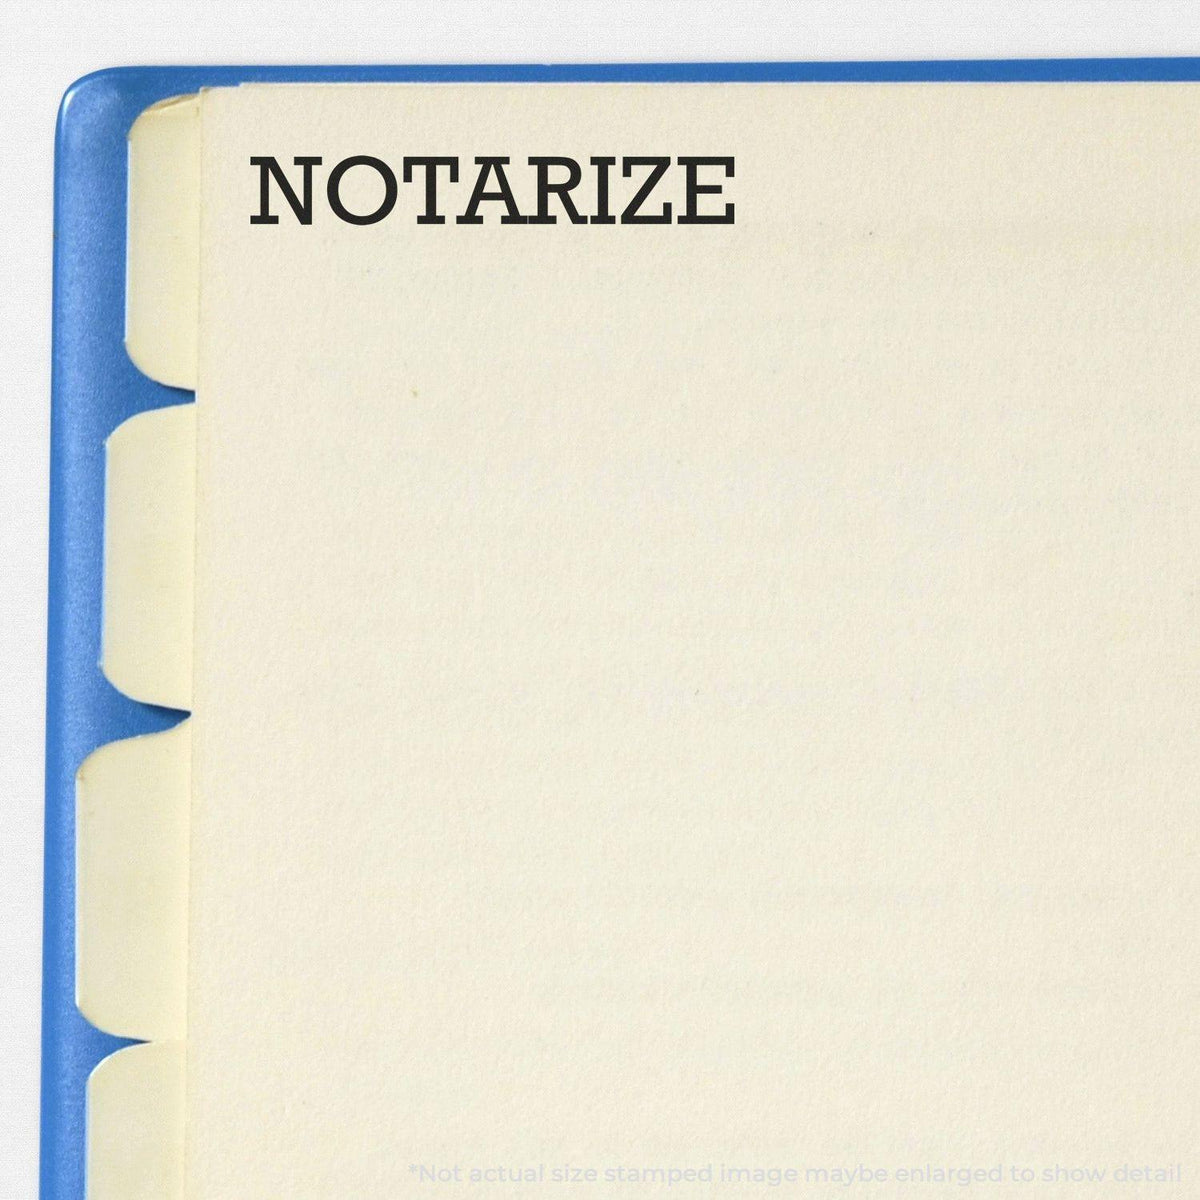 In Use Large Notarize Rubber Stamp Image